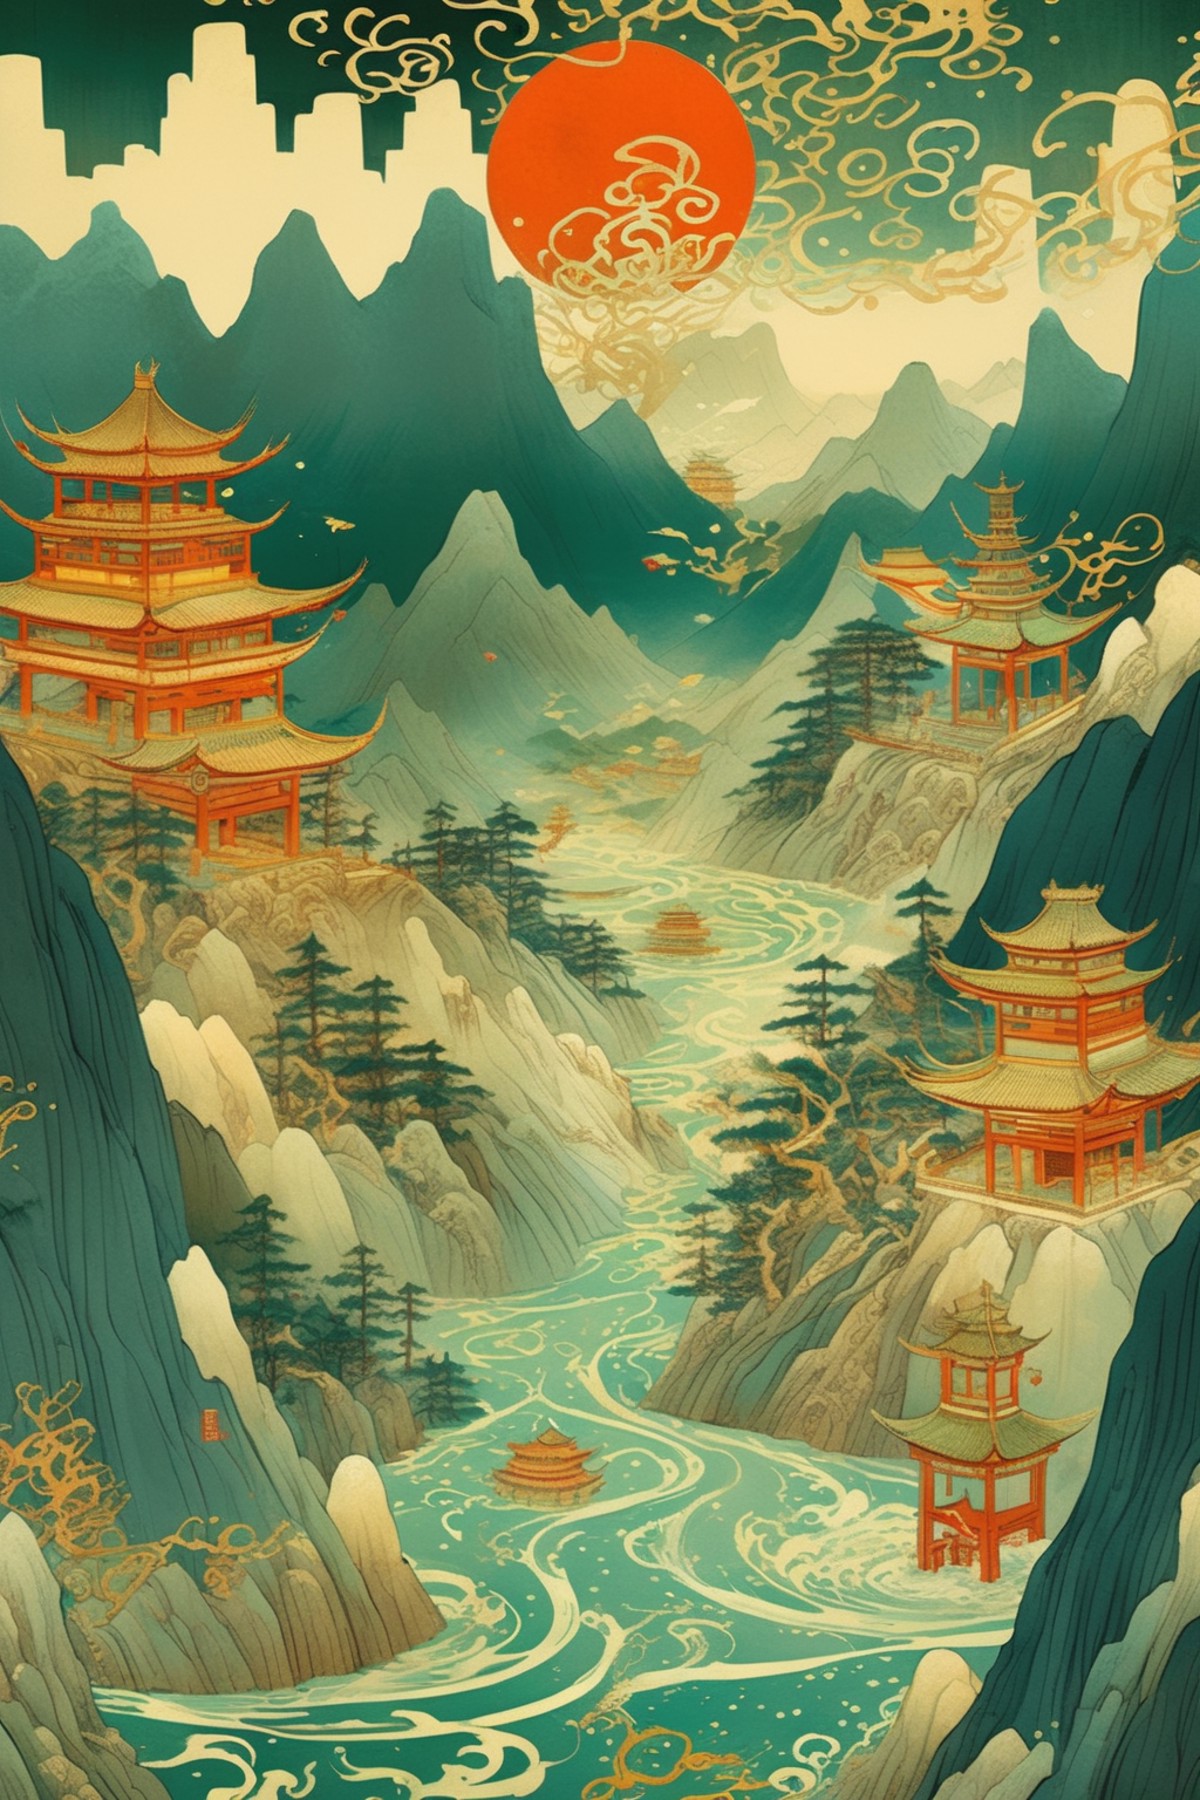 <lora:Victo Ngai Style:1>Victo Ngai Style - imagine illustrated by Guochao by Victo Ngai.The mountains of China are unbrok...